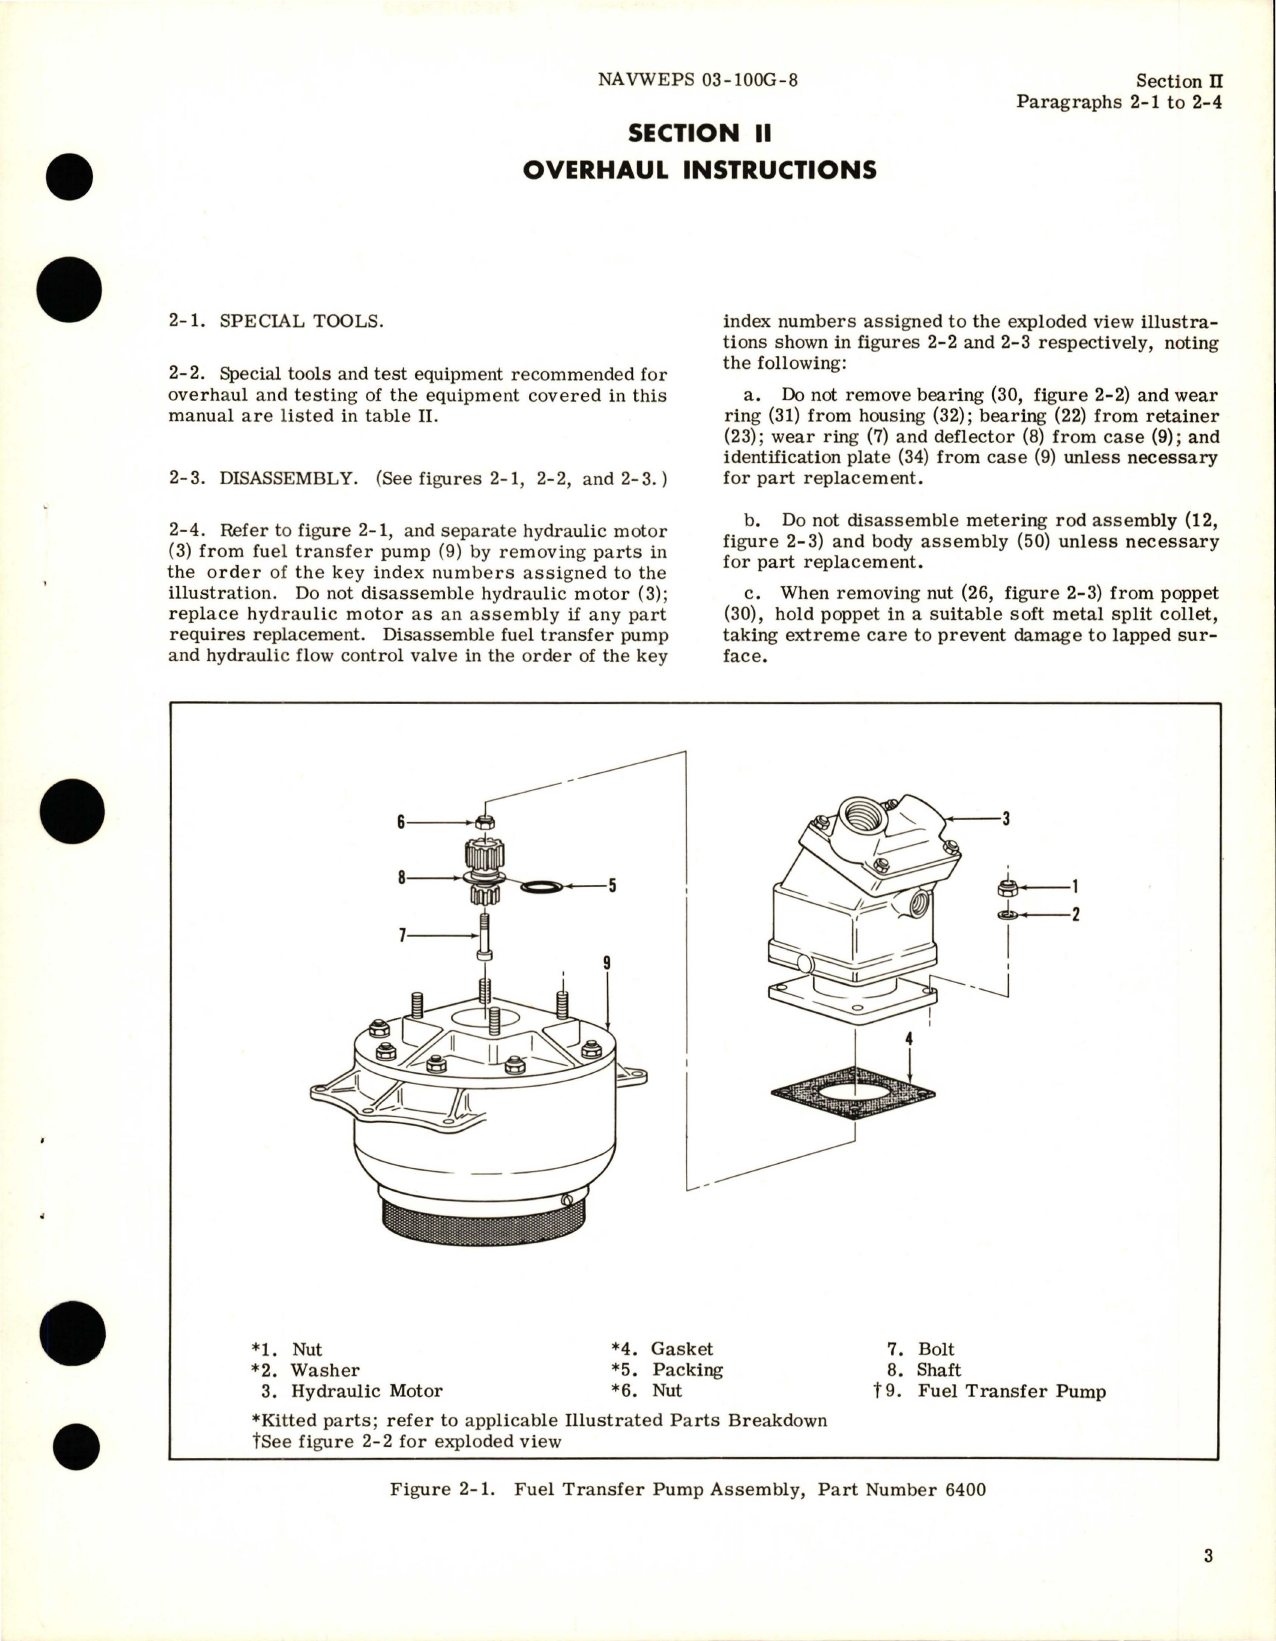 Sample page 5 from AirCorps Library document: Overhaul Instructions for Fuel Transfer Pump Assembly, Hydraulic Flow Control Valve, and Venturi 